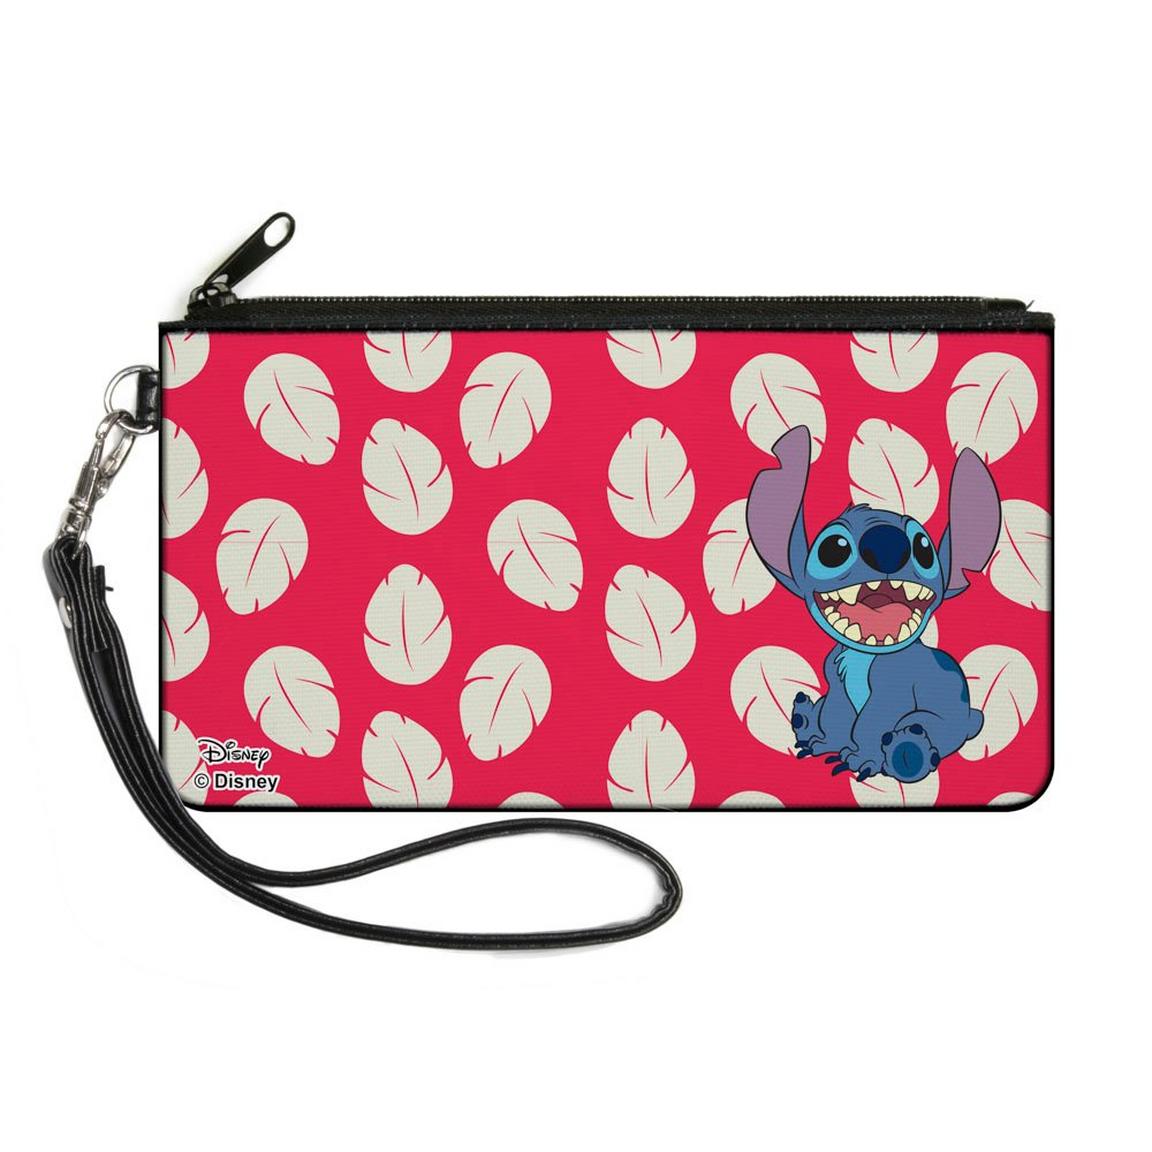 Buckle-Down Disney Lilo and Stitch - Stitch Smiling Pose Dress Leaves Canvas Zip Clutch Wallet, Size: One Size, Buckle Down